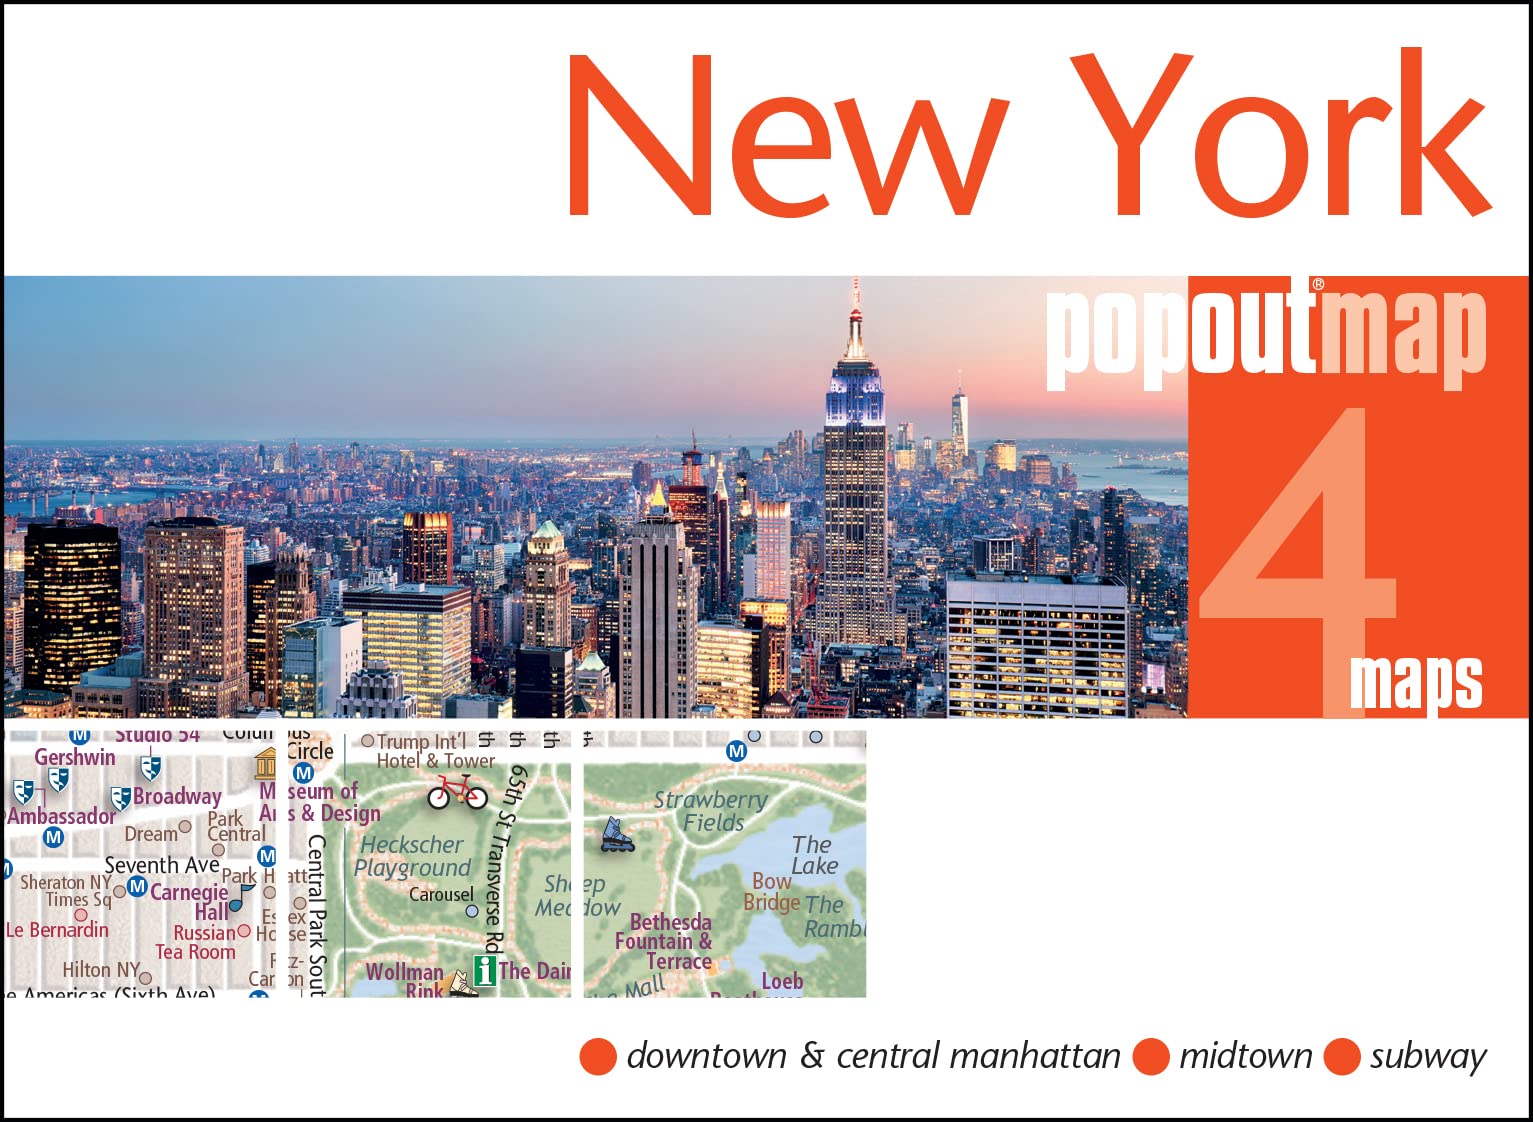 New York Popout Map